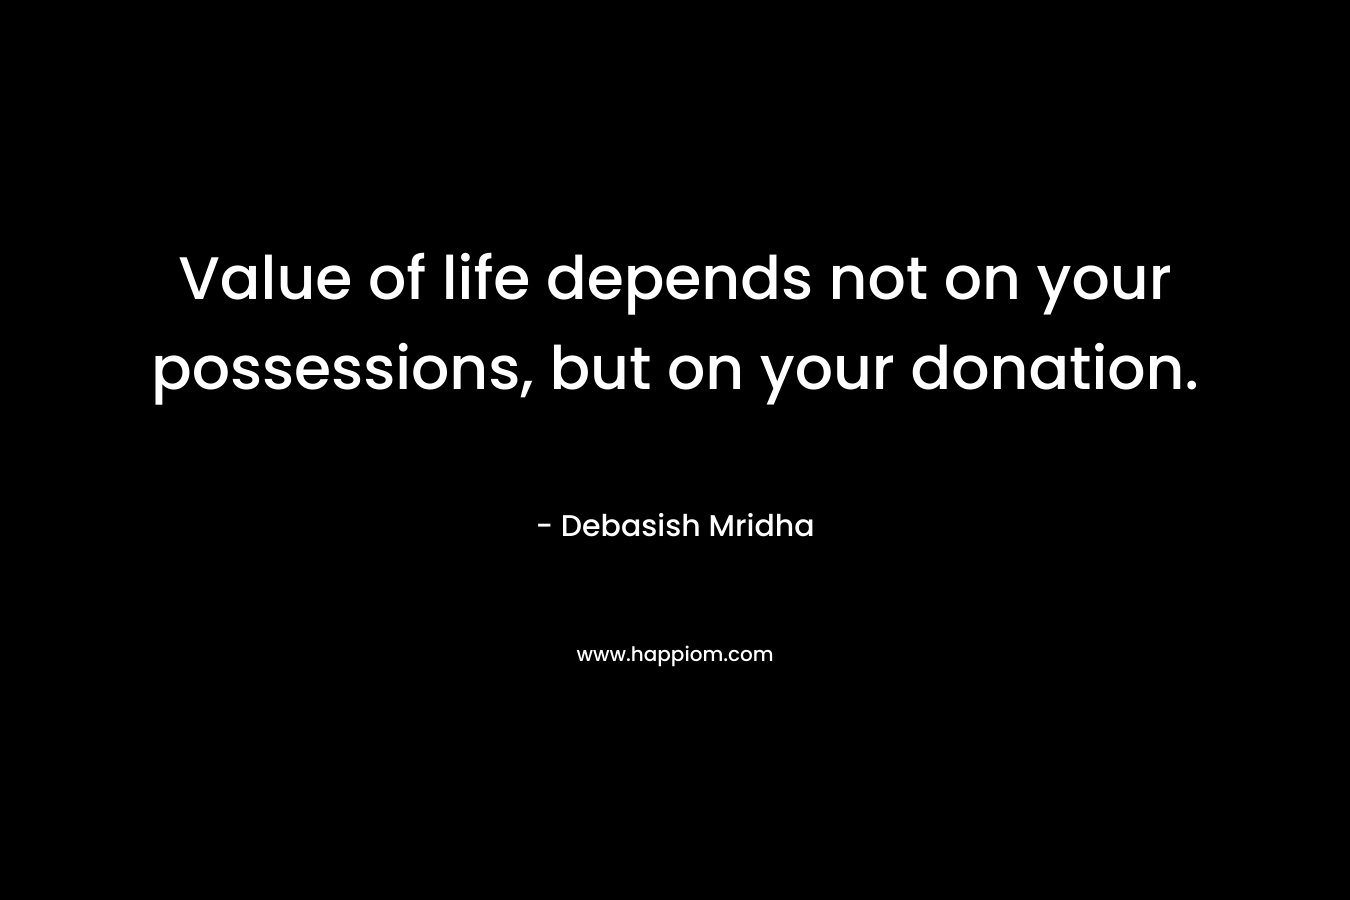 Value of life depends not on your possessions, but on your donation. – Debasish Mridha